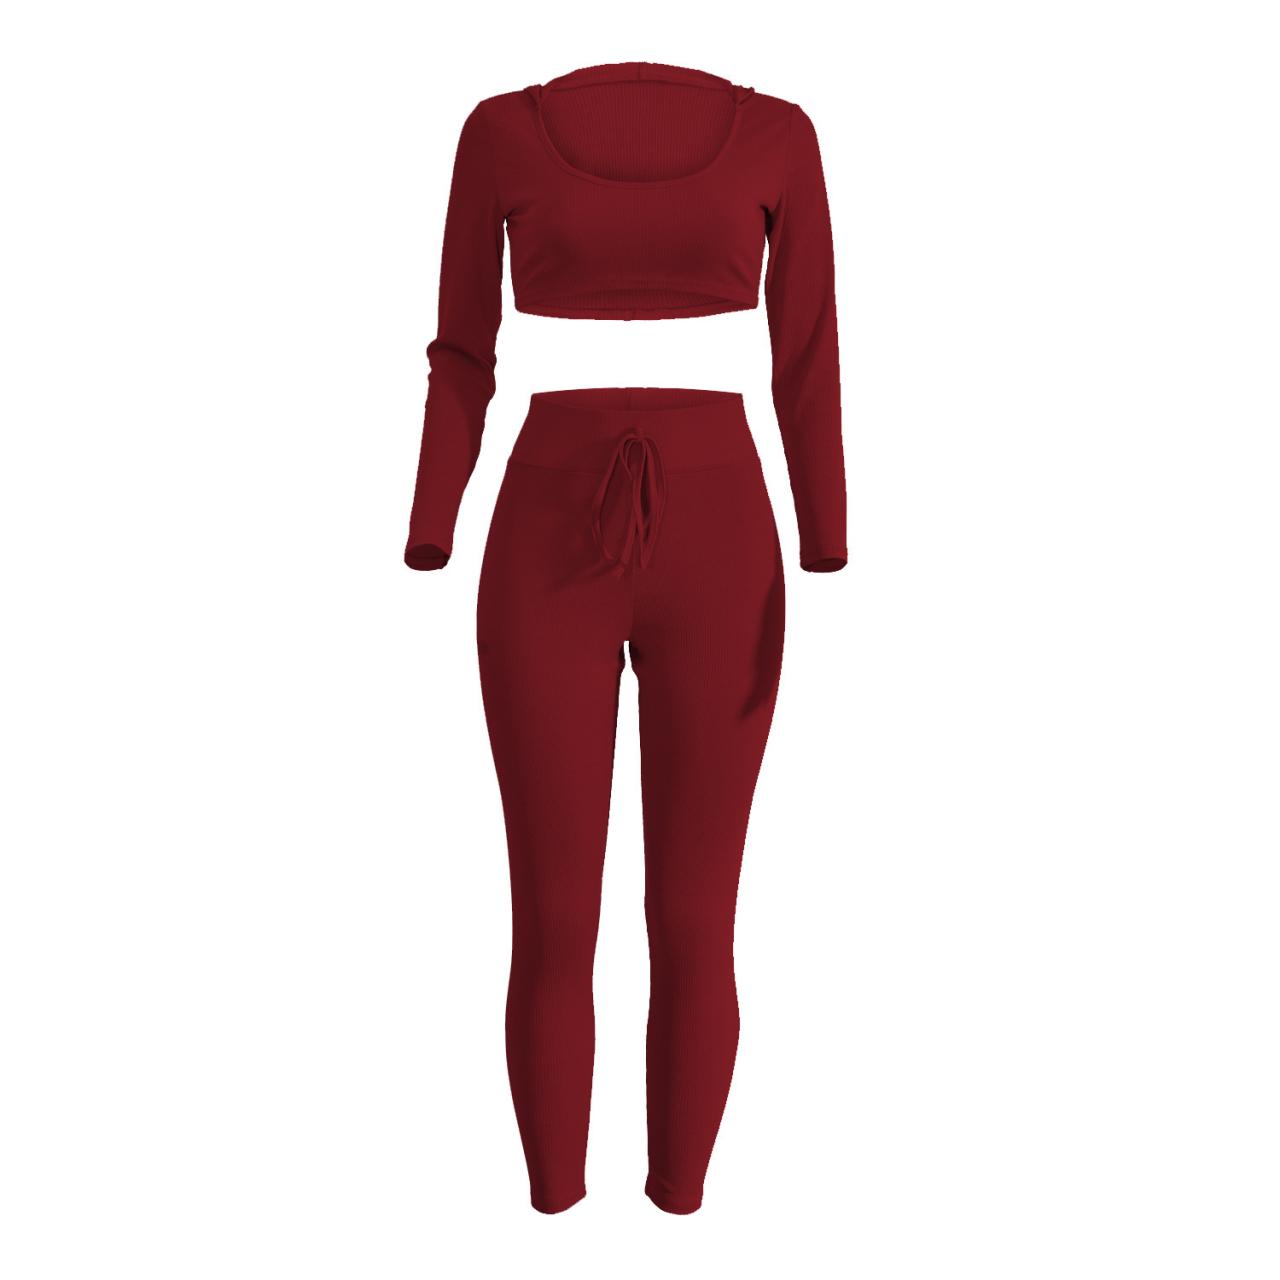 Spring Women Casaul Tracksuit Long Sleeve Hoodie+Pants Two pieces Leisure Sets Nightclub Party Suits burgundy